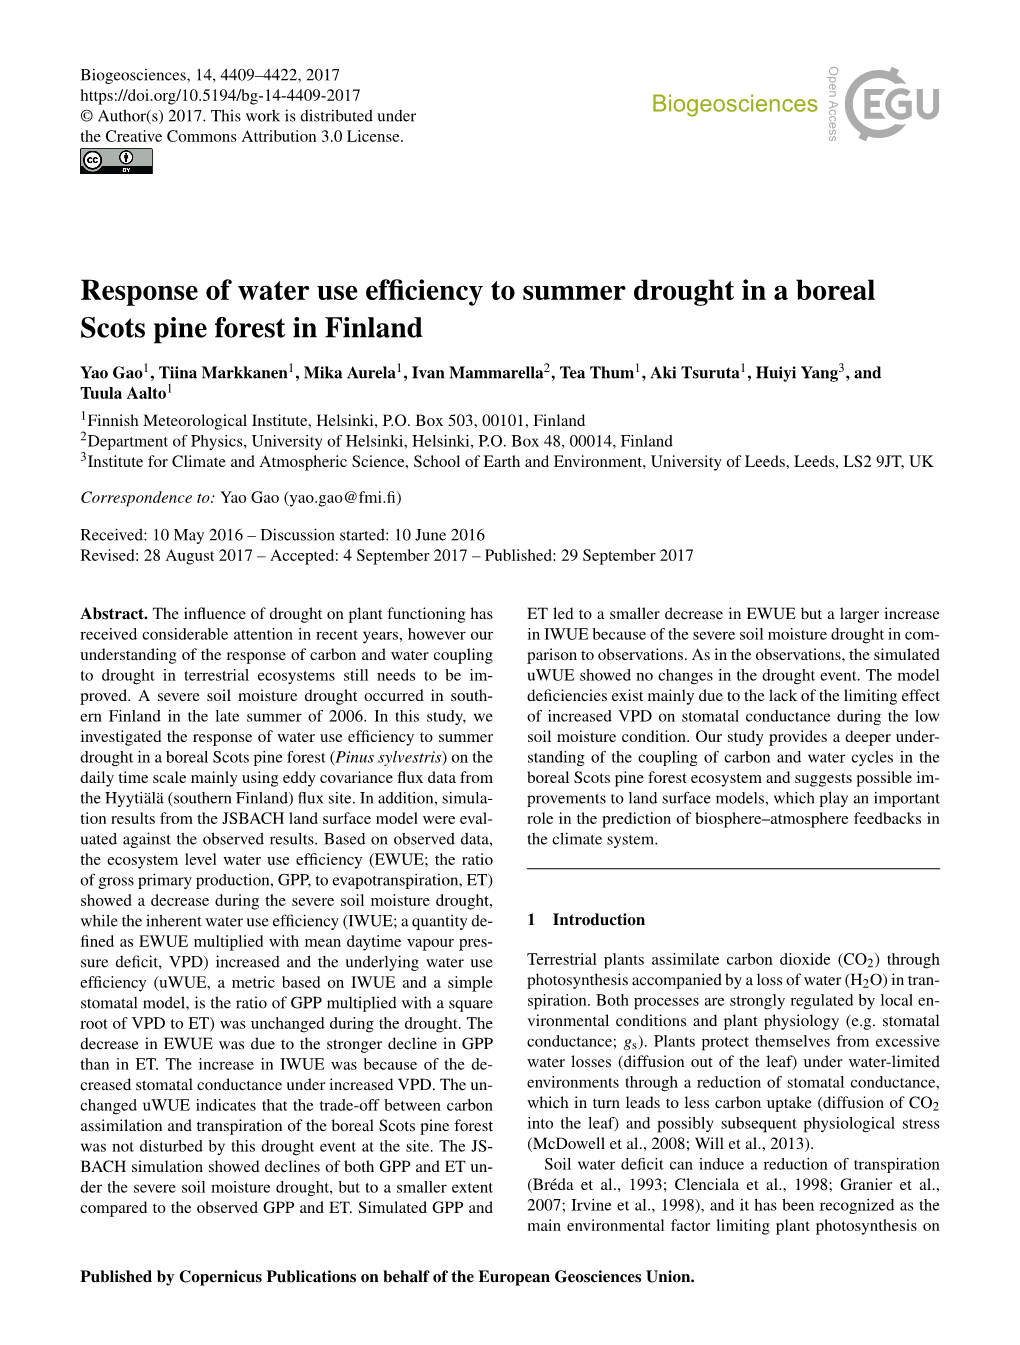 Response of Water Use Efficiency to Summer Drought in a Boreal Scots